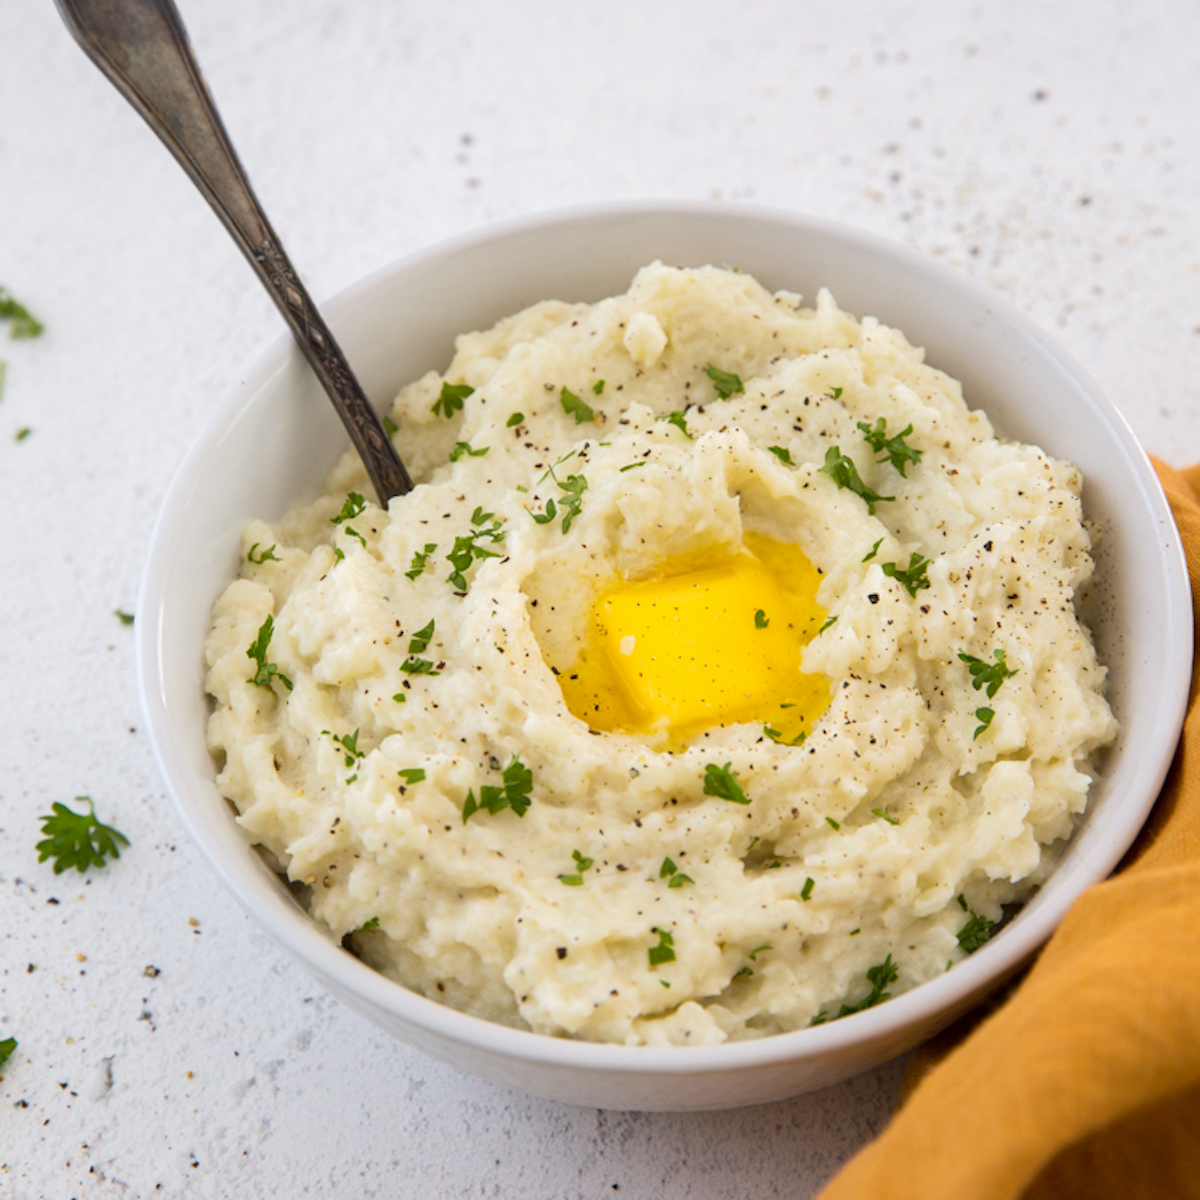 A bowl of mashed cauliflower with an egg in it.